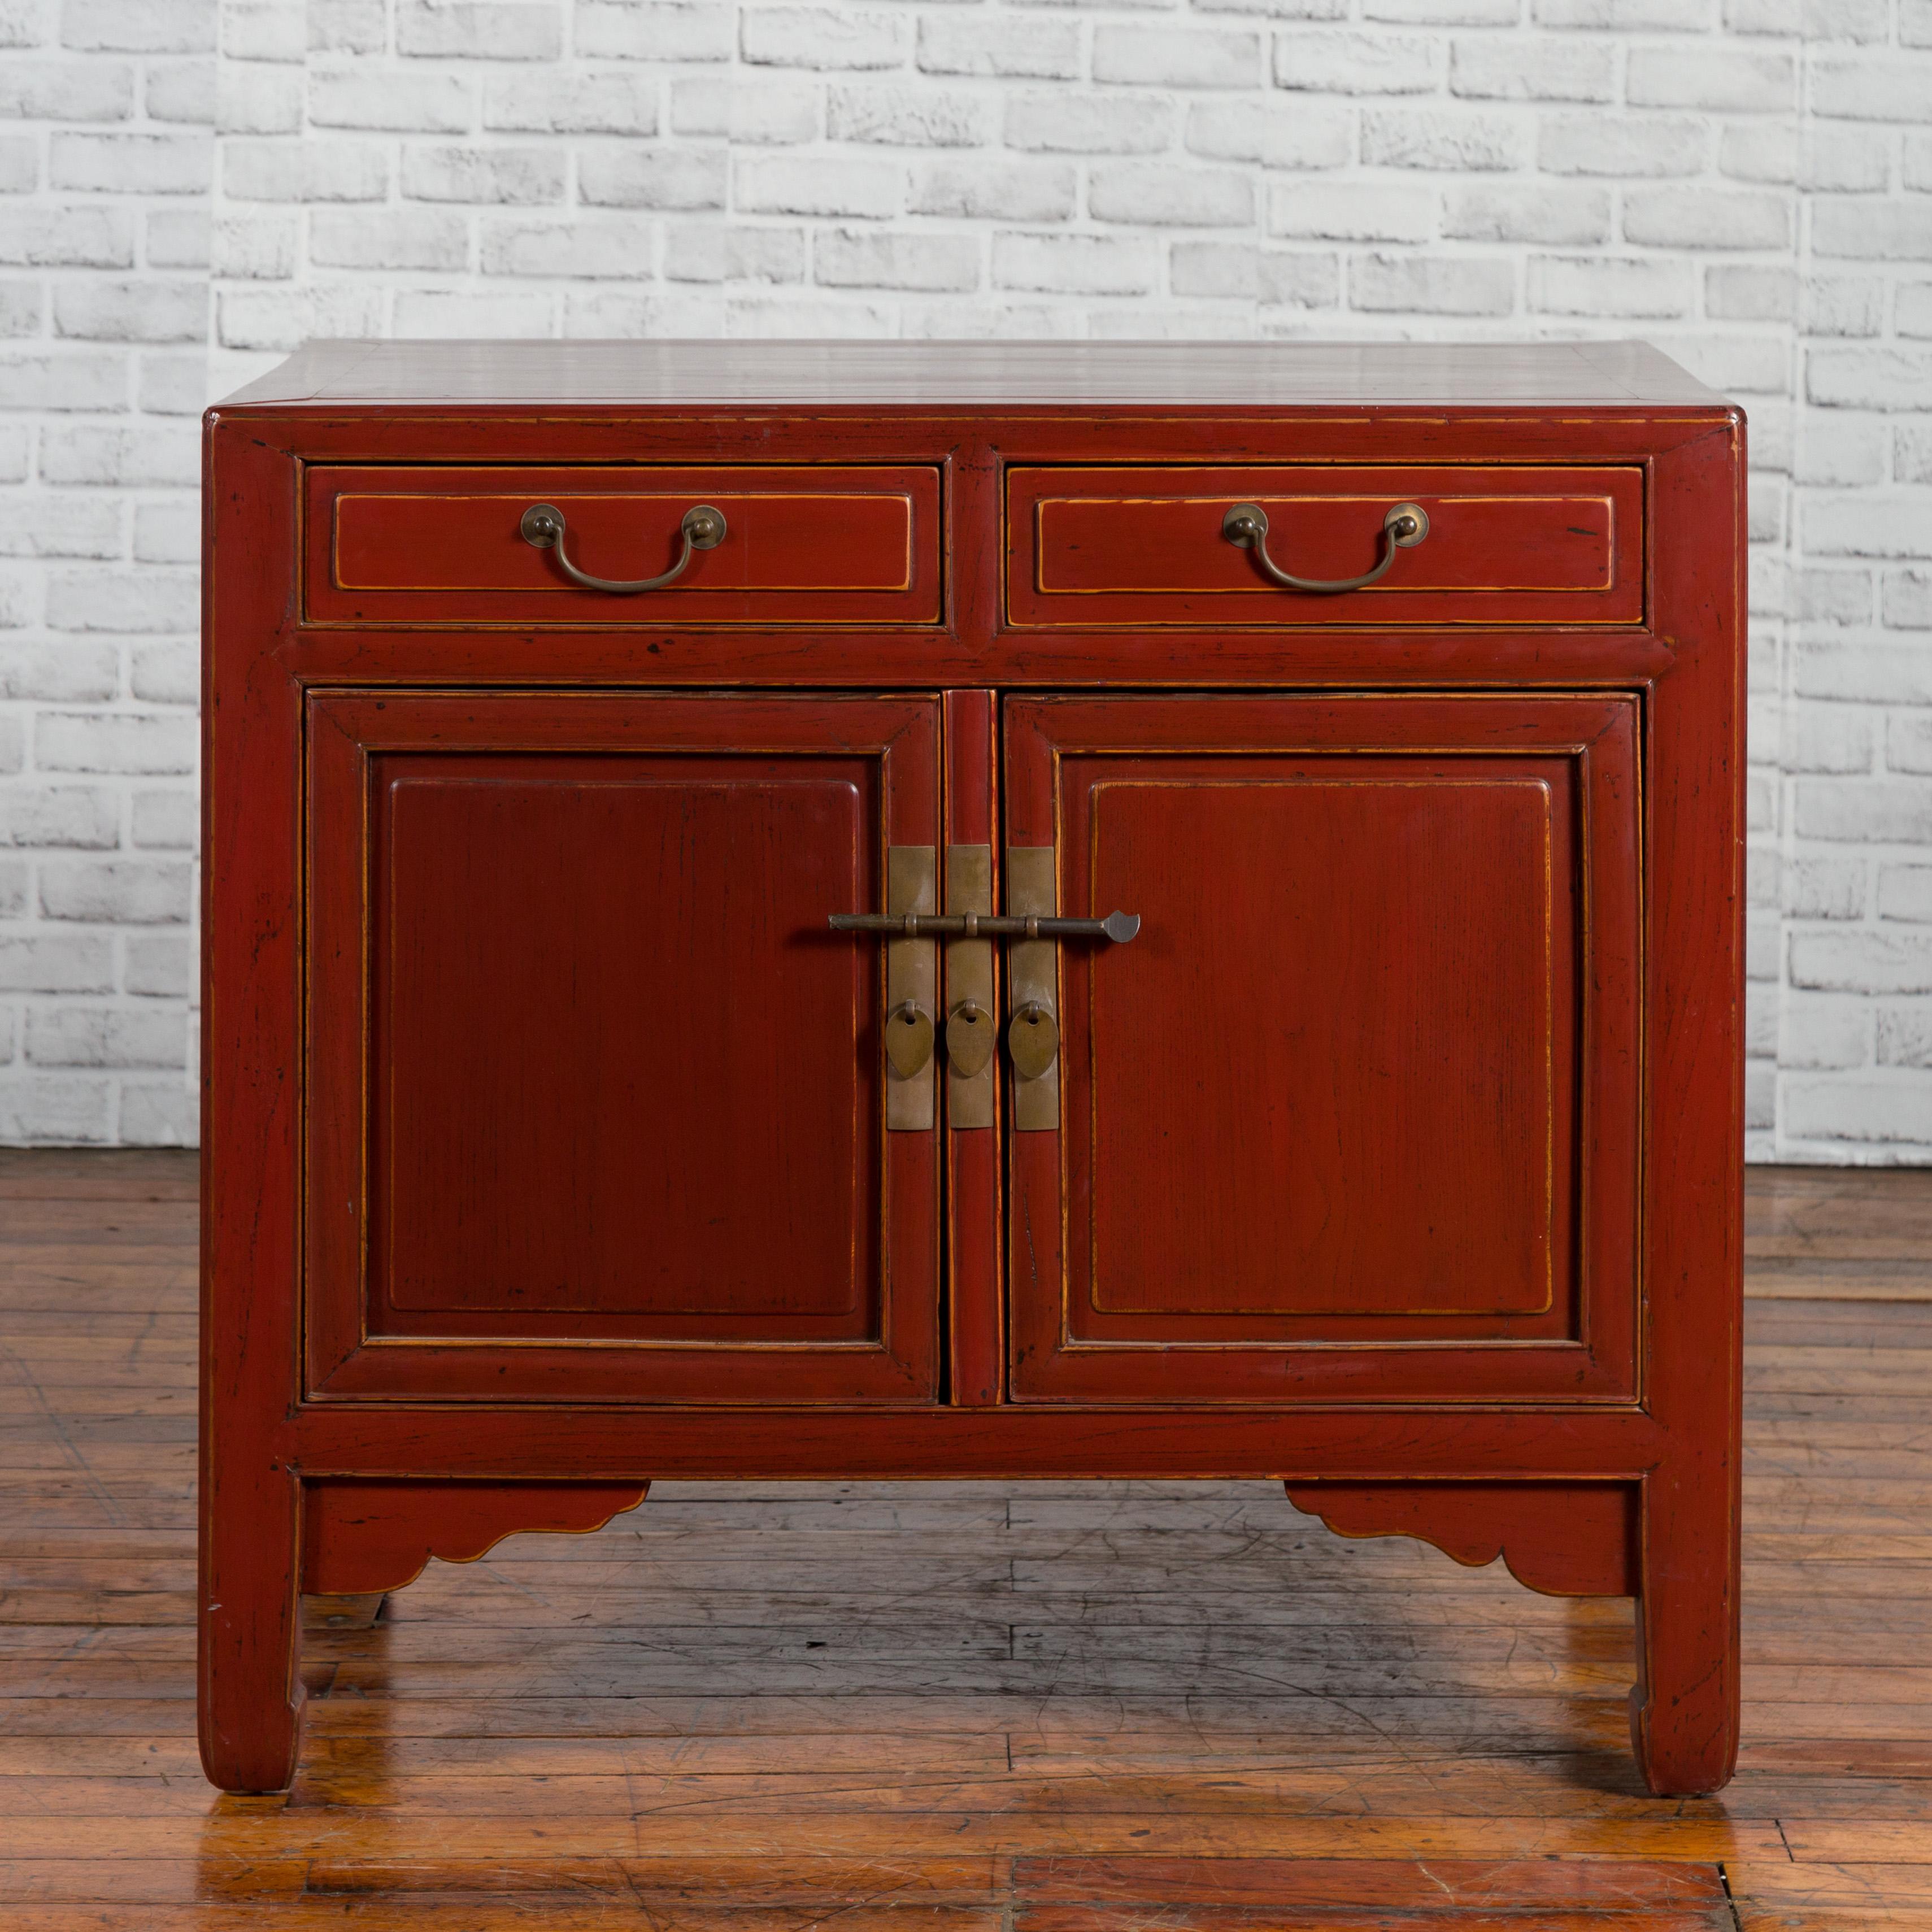 A Chinese Qing dynasty period red lacquered elm cabinet from the 19th century, with two drawers over two doors. Created in China during the Qing dynasty period, this elm cabinet attracts our attention with its red lacquered finish complimenting the